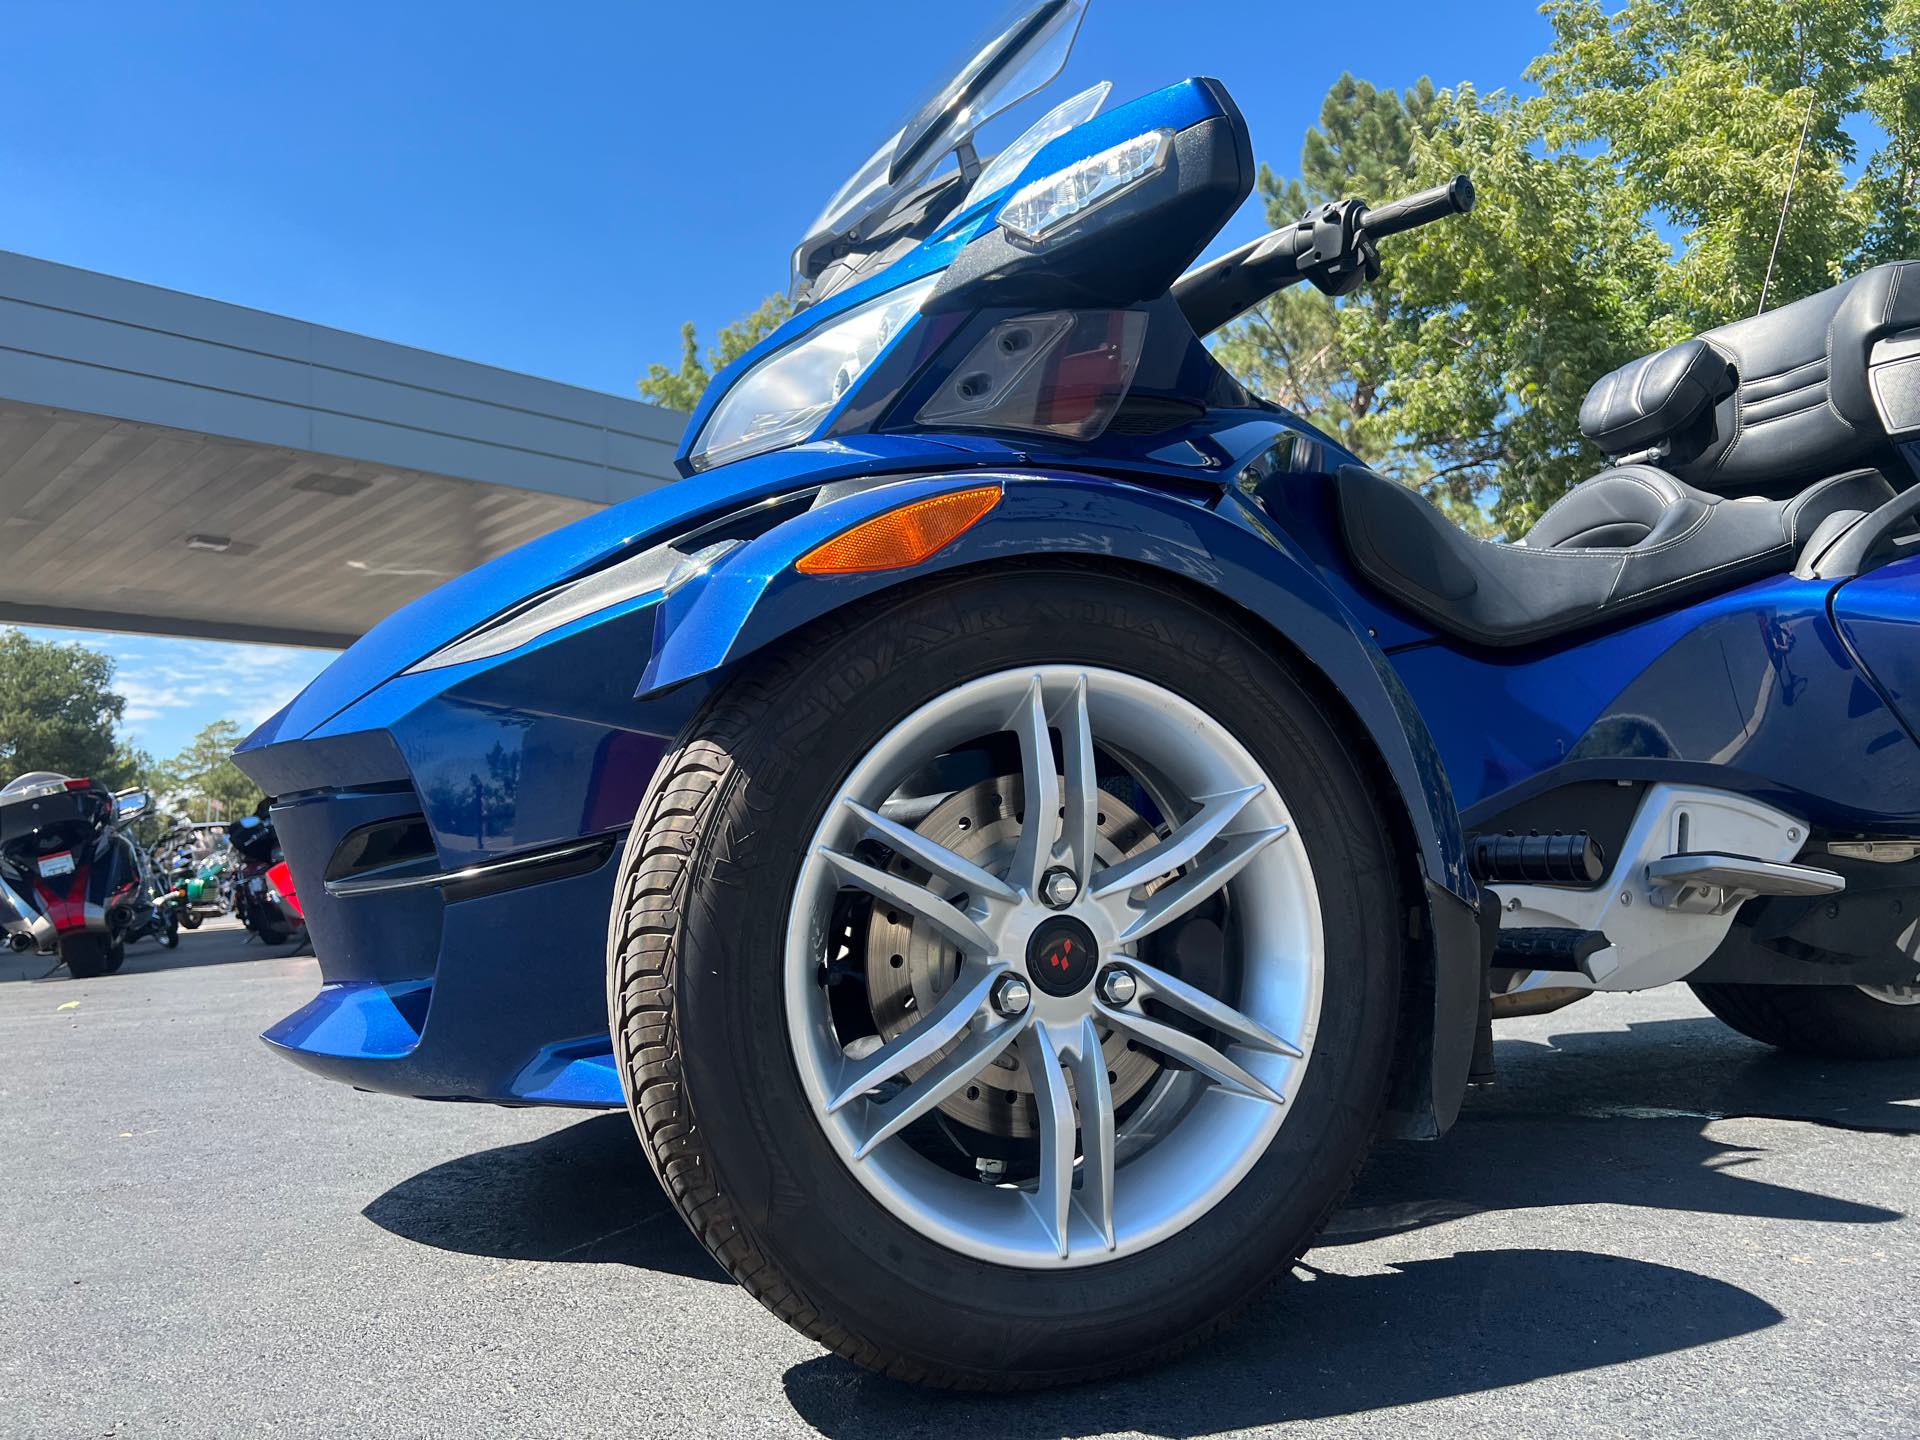 2011 Can-Am Spyder Roadster RT at Aces Motorcycles - Fort Collins